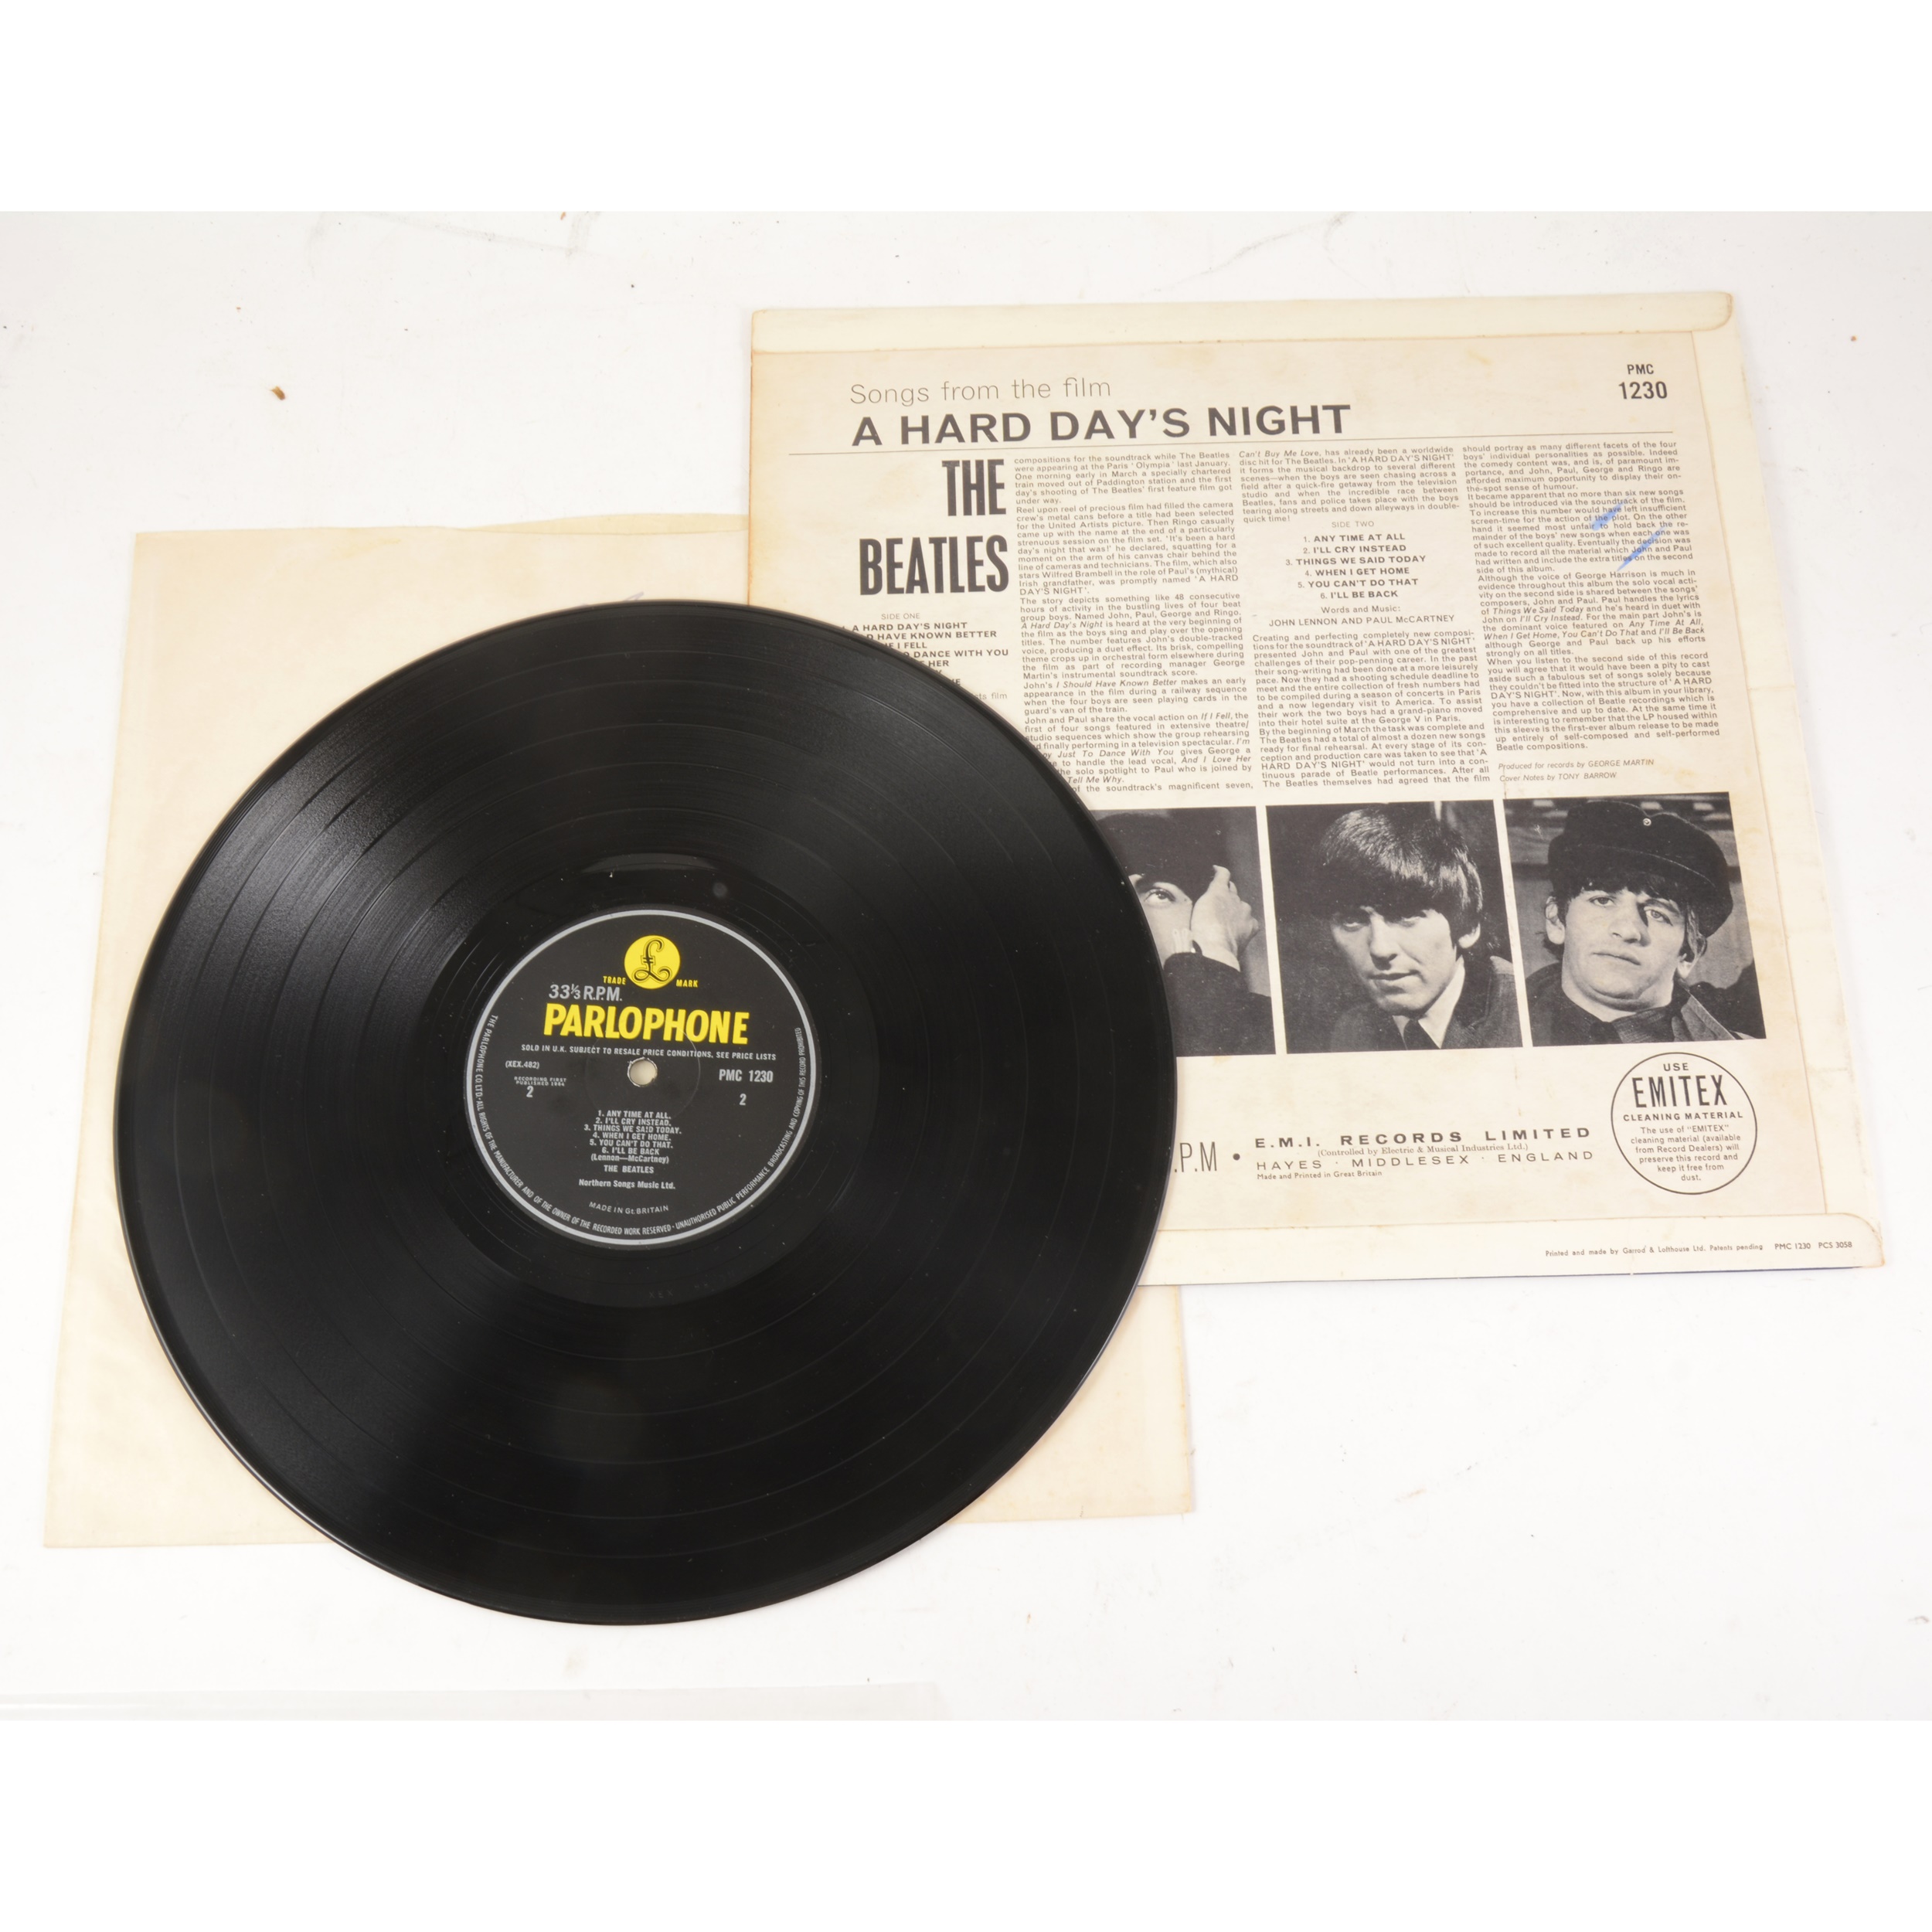 The Beatles A Hard Day's Night LP vinyl record; Mono first pressing PMC 1230 matrix 481-3N/482-3N, - Image 2 of 3